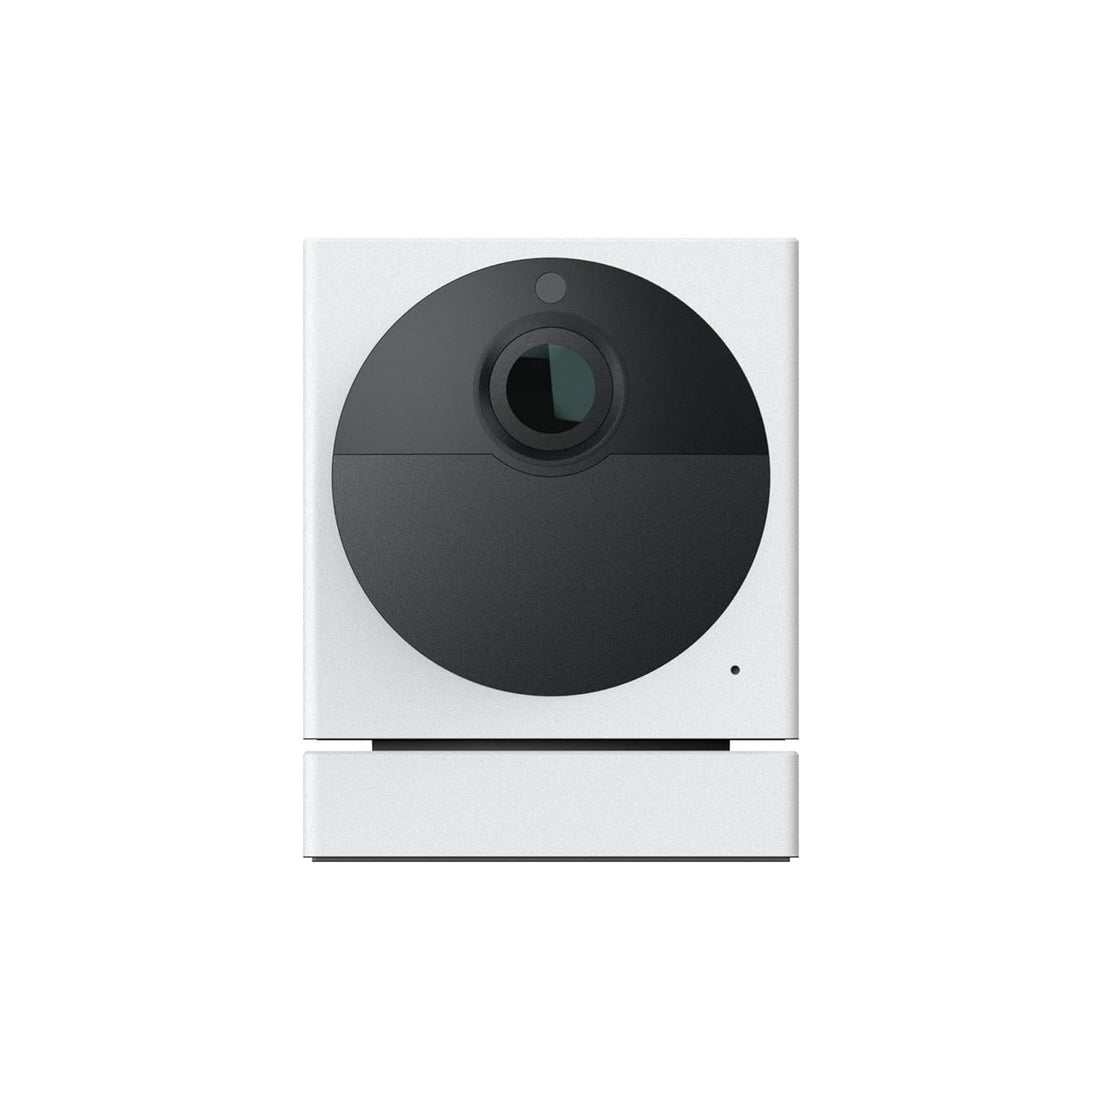 Wyze Cam Outdoor Add-on Camera, 1080p HD Indoor/Outdoor Wire-Free Smart Home Camera with Night Vision, 2-Way Audio, Compatible with Alexa & Google Assistant (base station required)